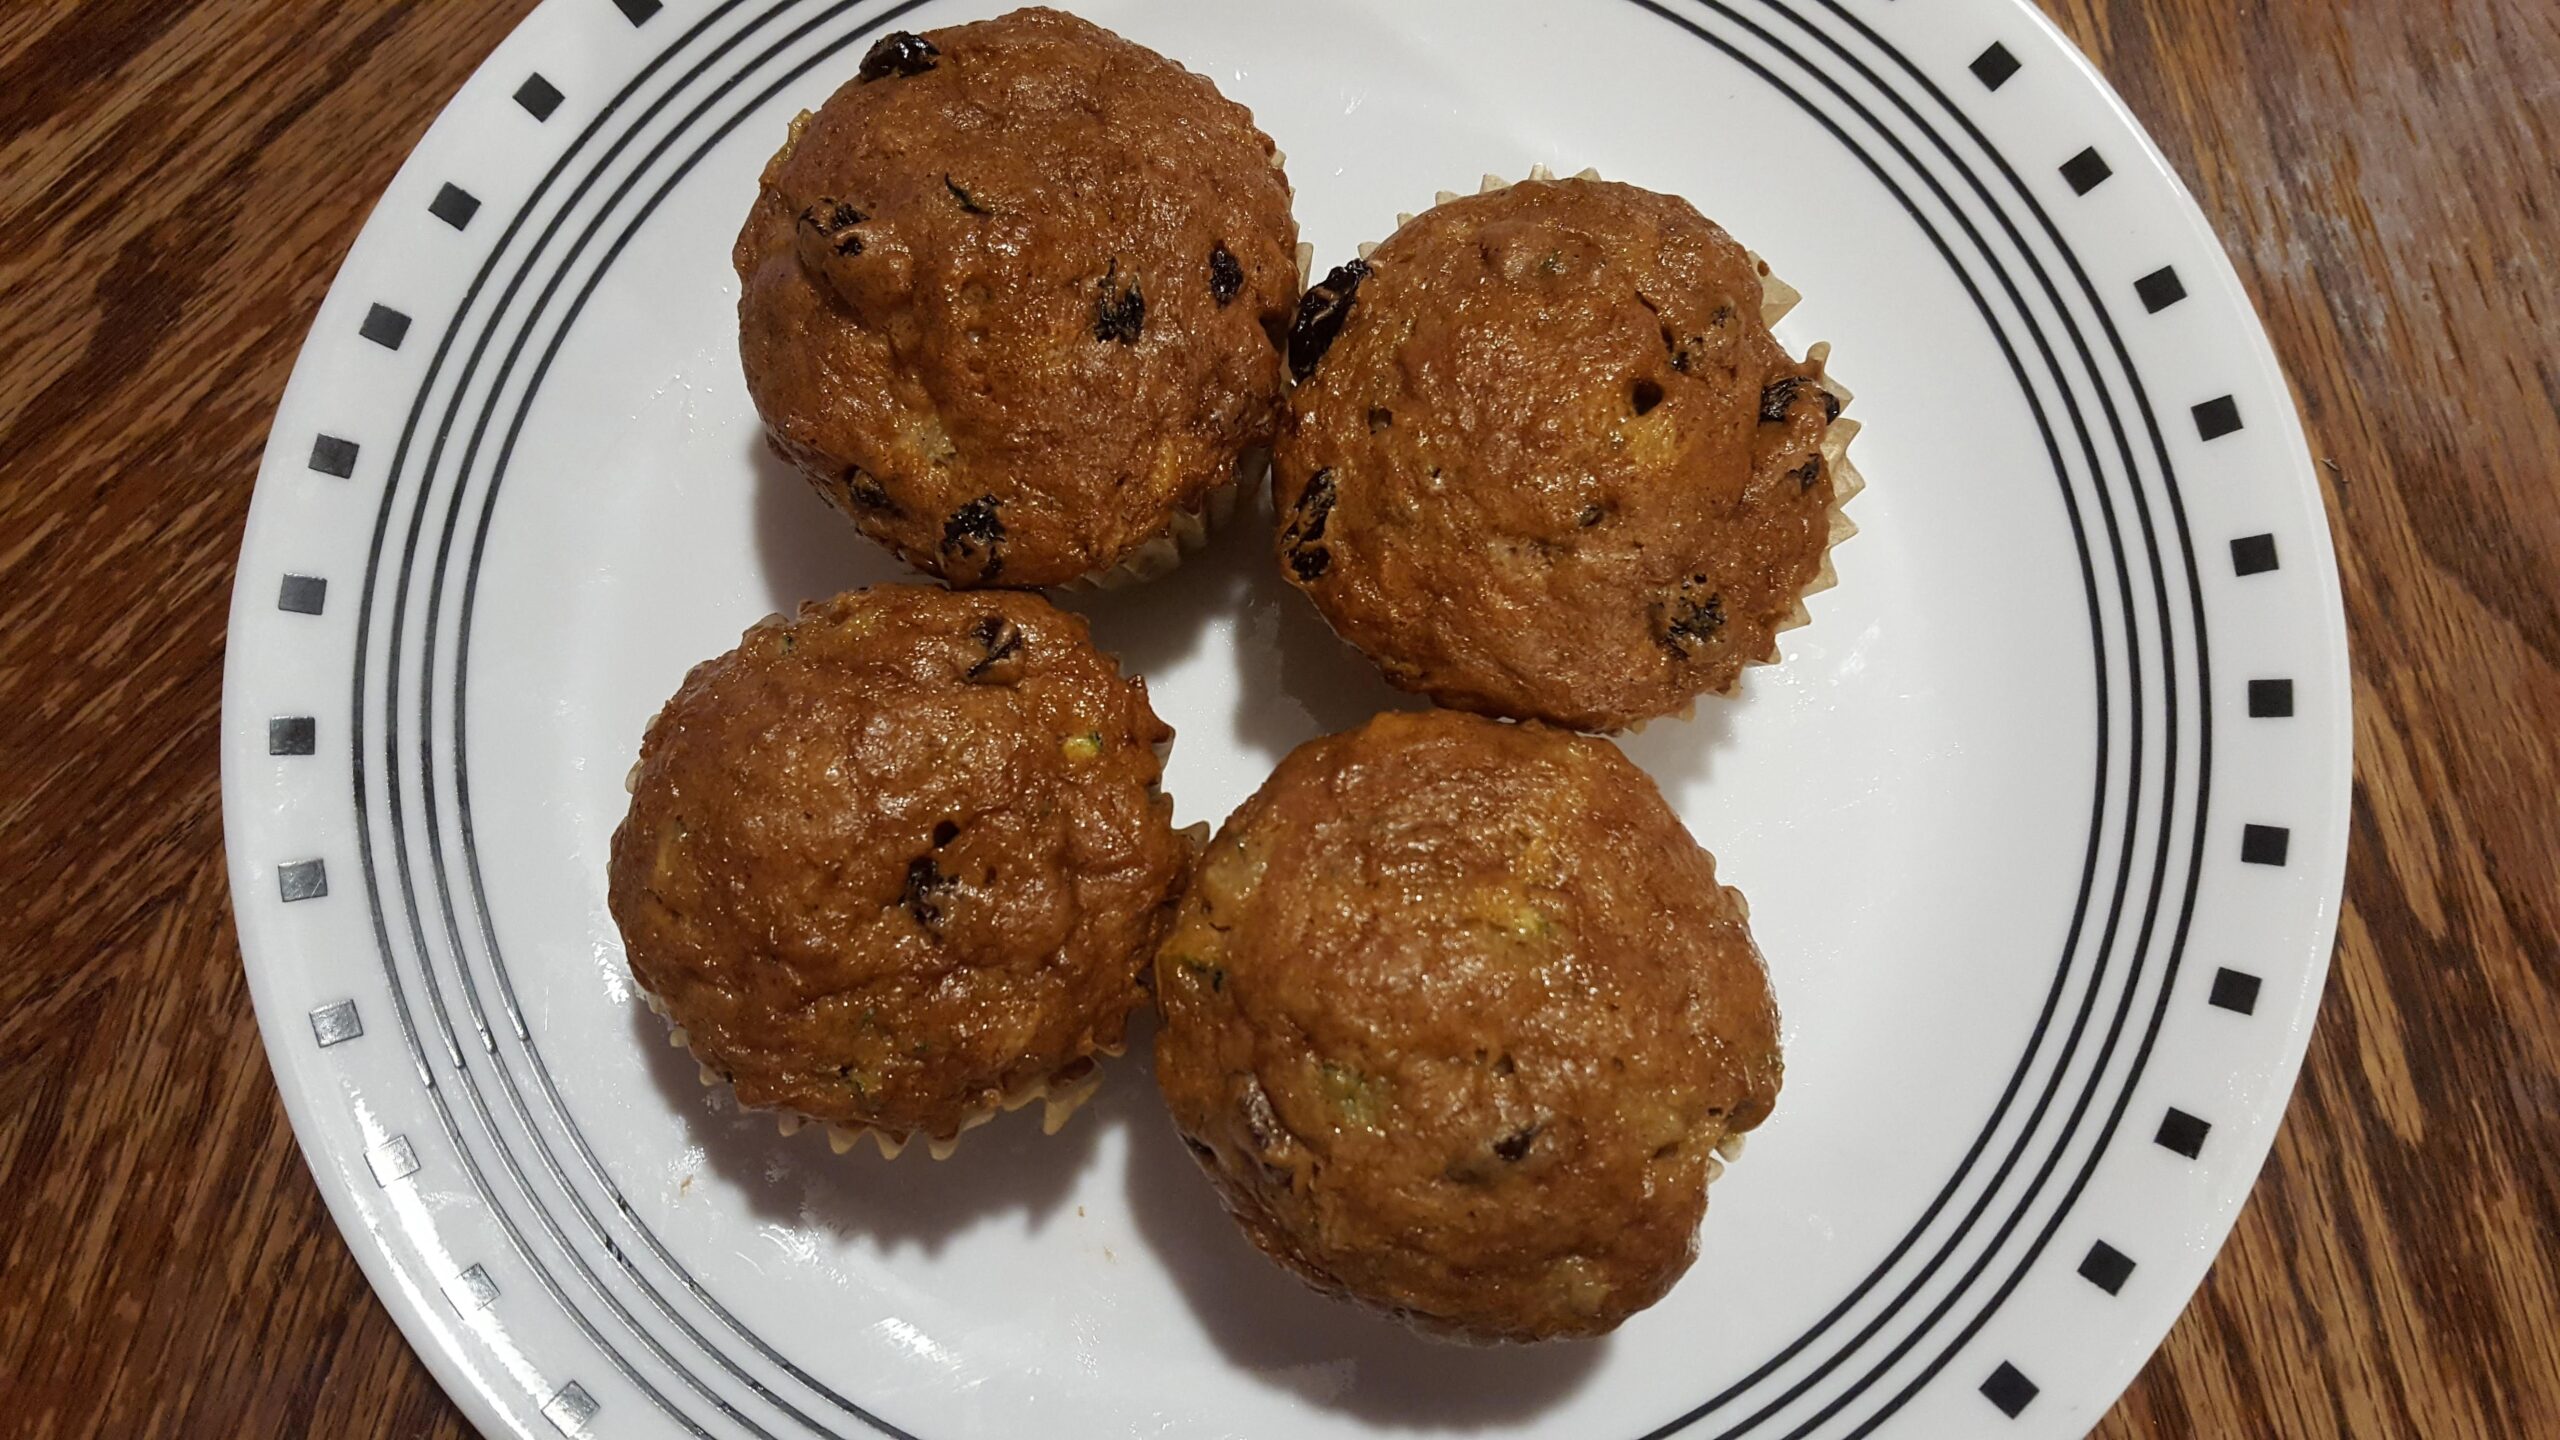  Get ready to taste the perfect combination of flavors in each bite of our gluten-free zucchini bread or muffins!